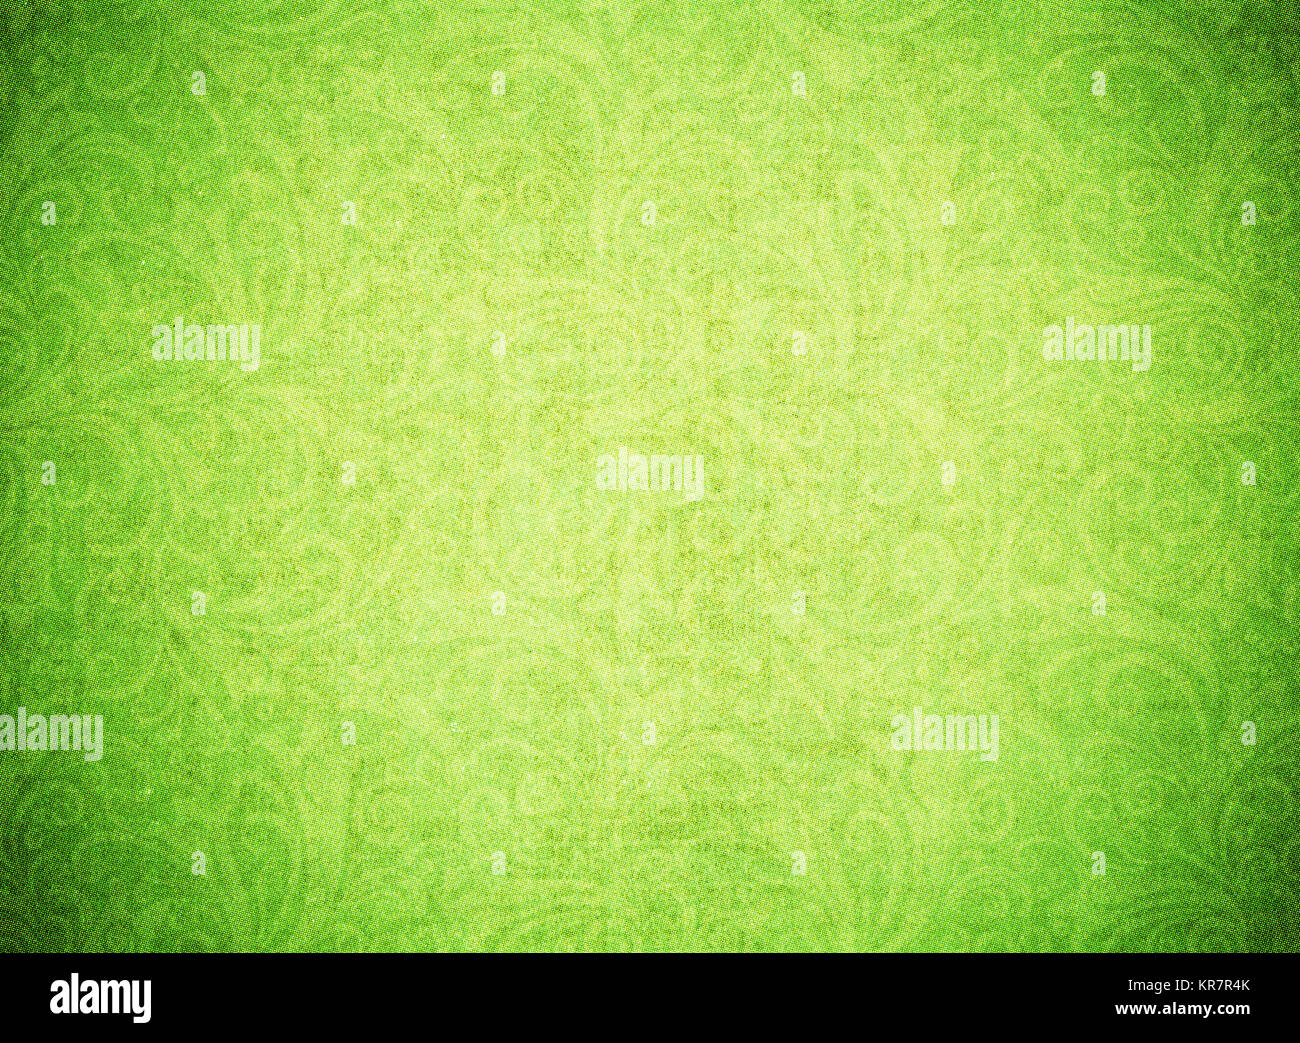 Green paper texture background Stock Photo